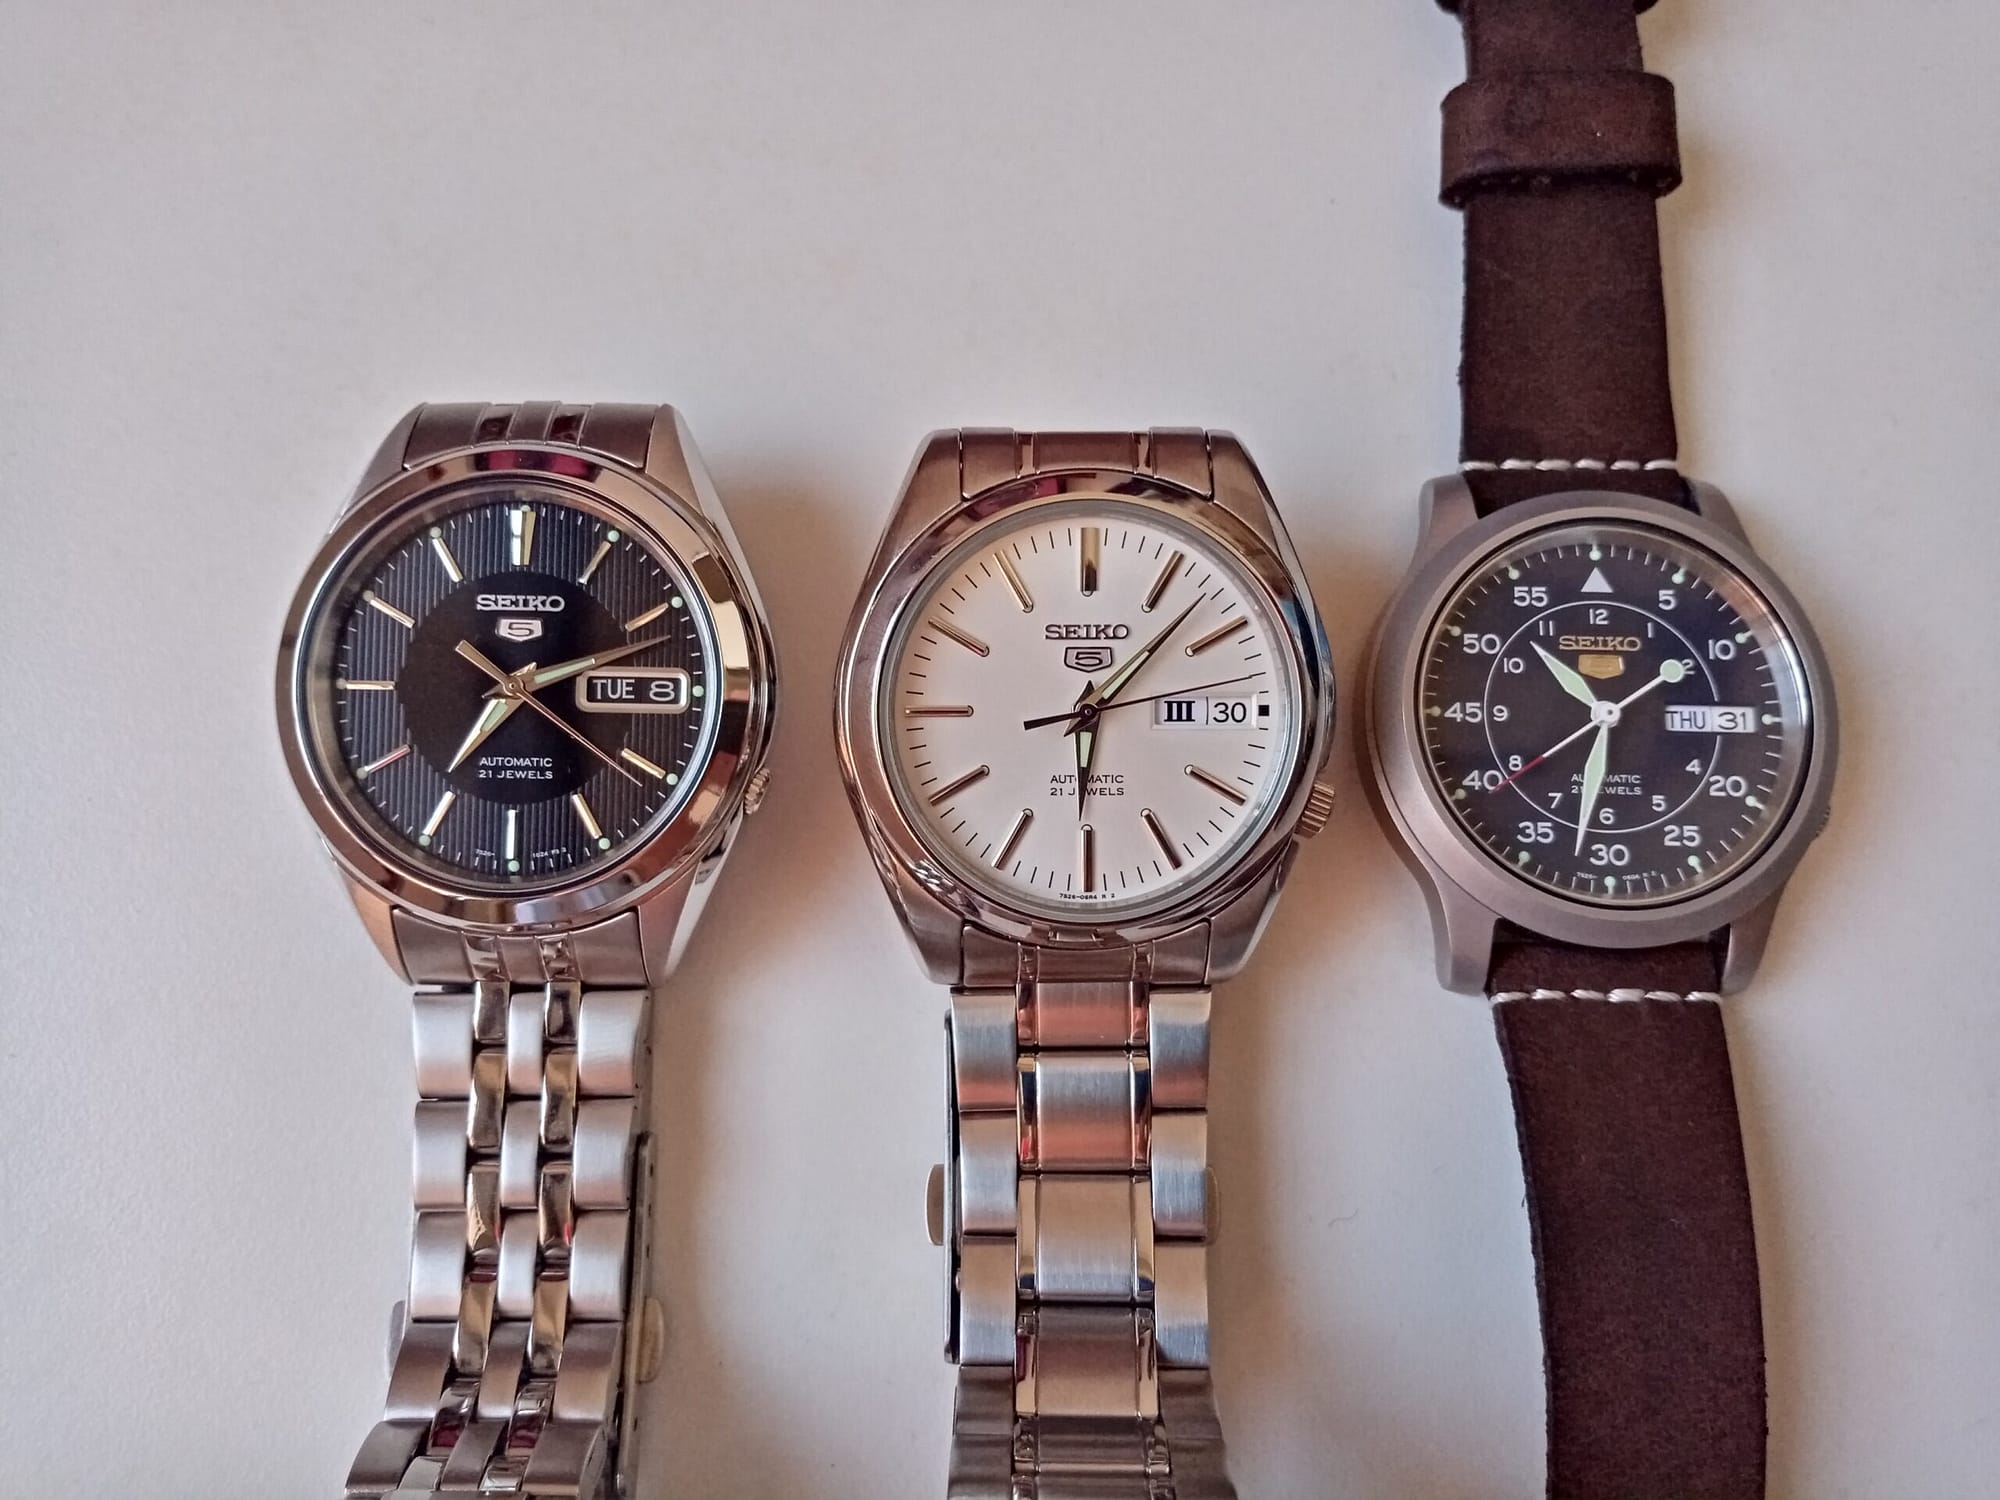 3-watch collection